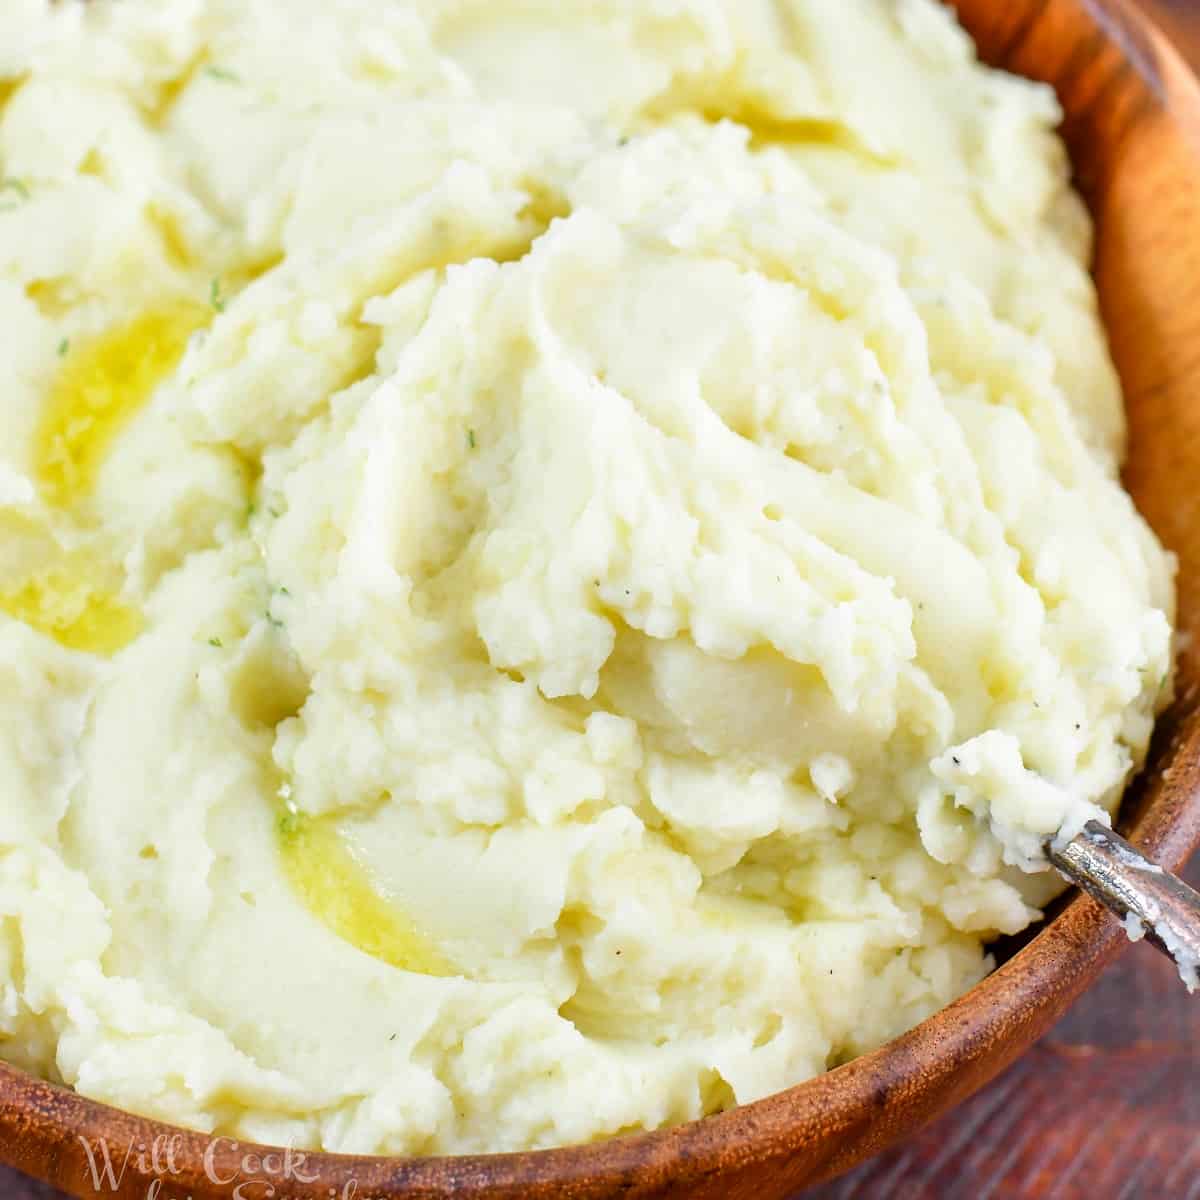 https://www.willcookforsmiles.com/wp-content/uploads/2020/10/Mashed-potatoes-scooping-out-some-square.jpg